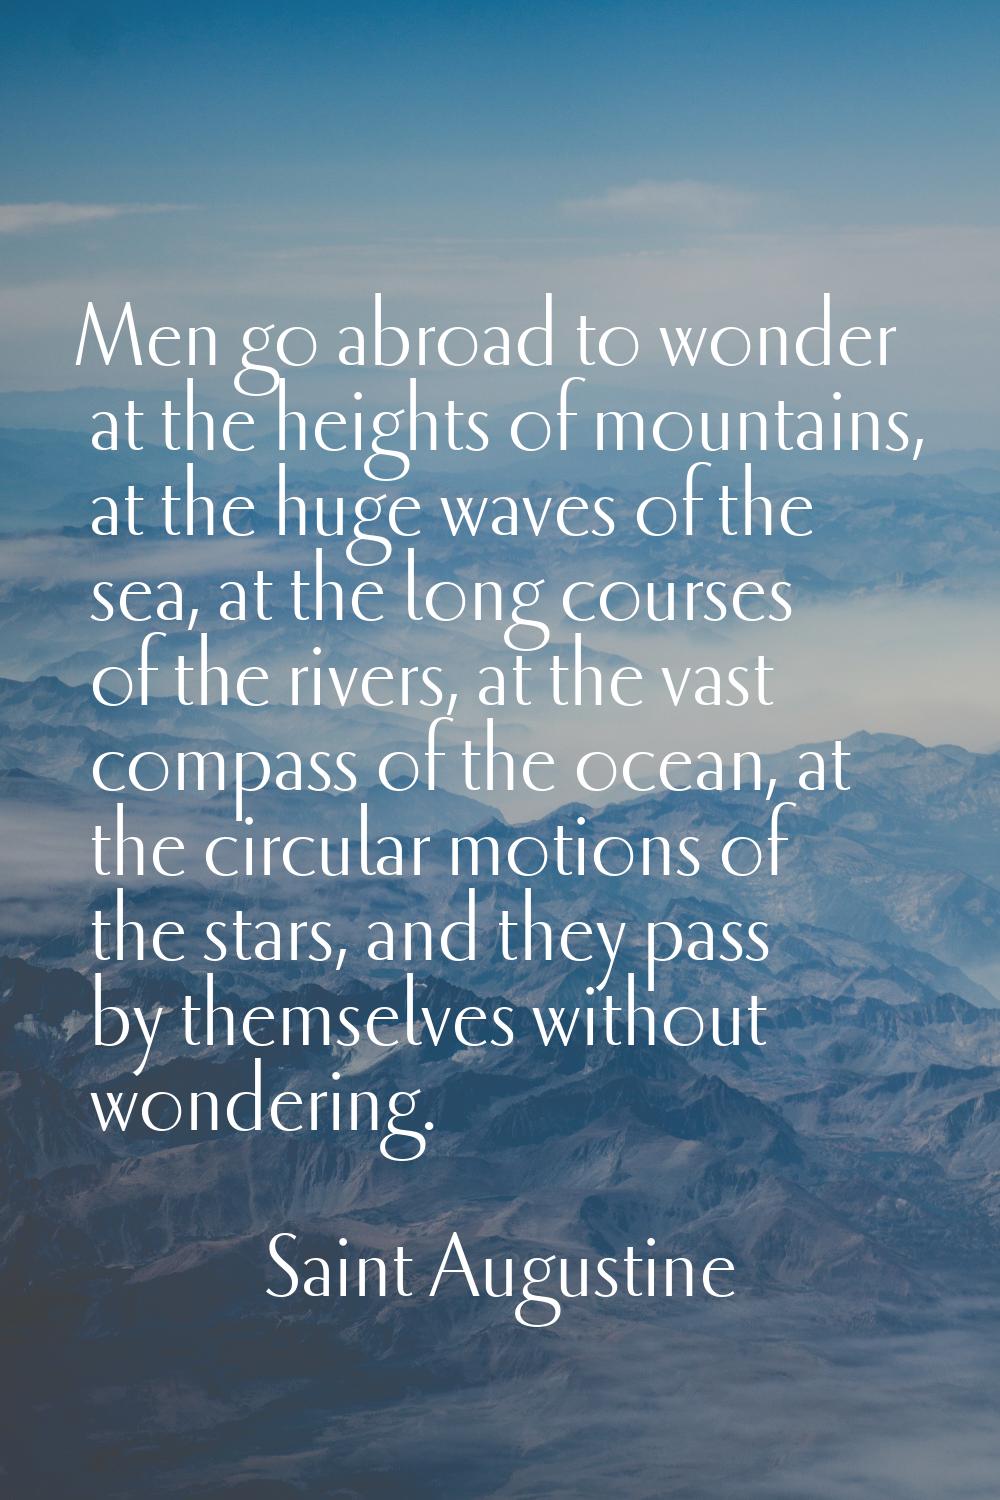 Men go abroad to wonder at the heights of mountains, at the huge waves of the sea, at the long cour